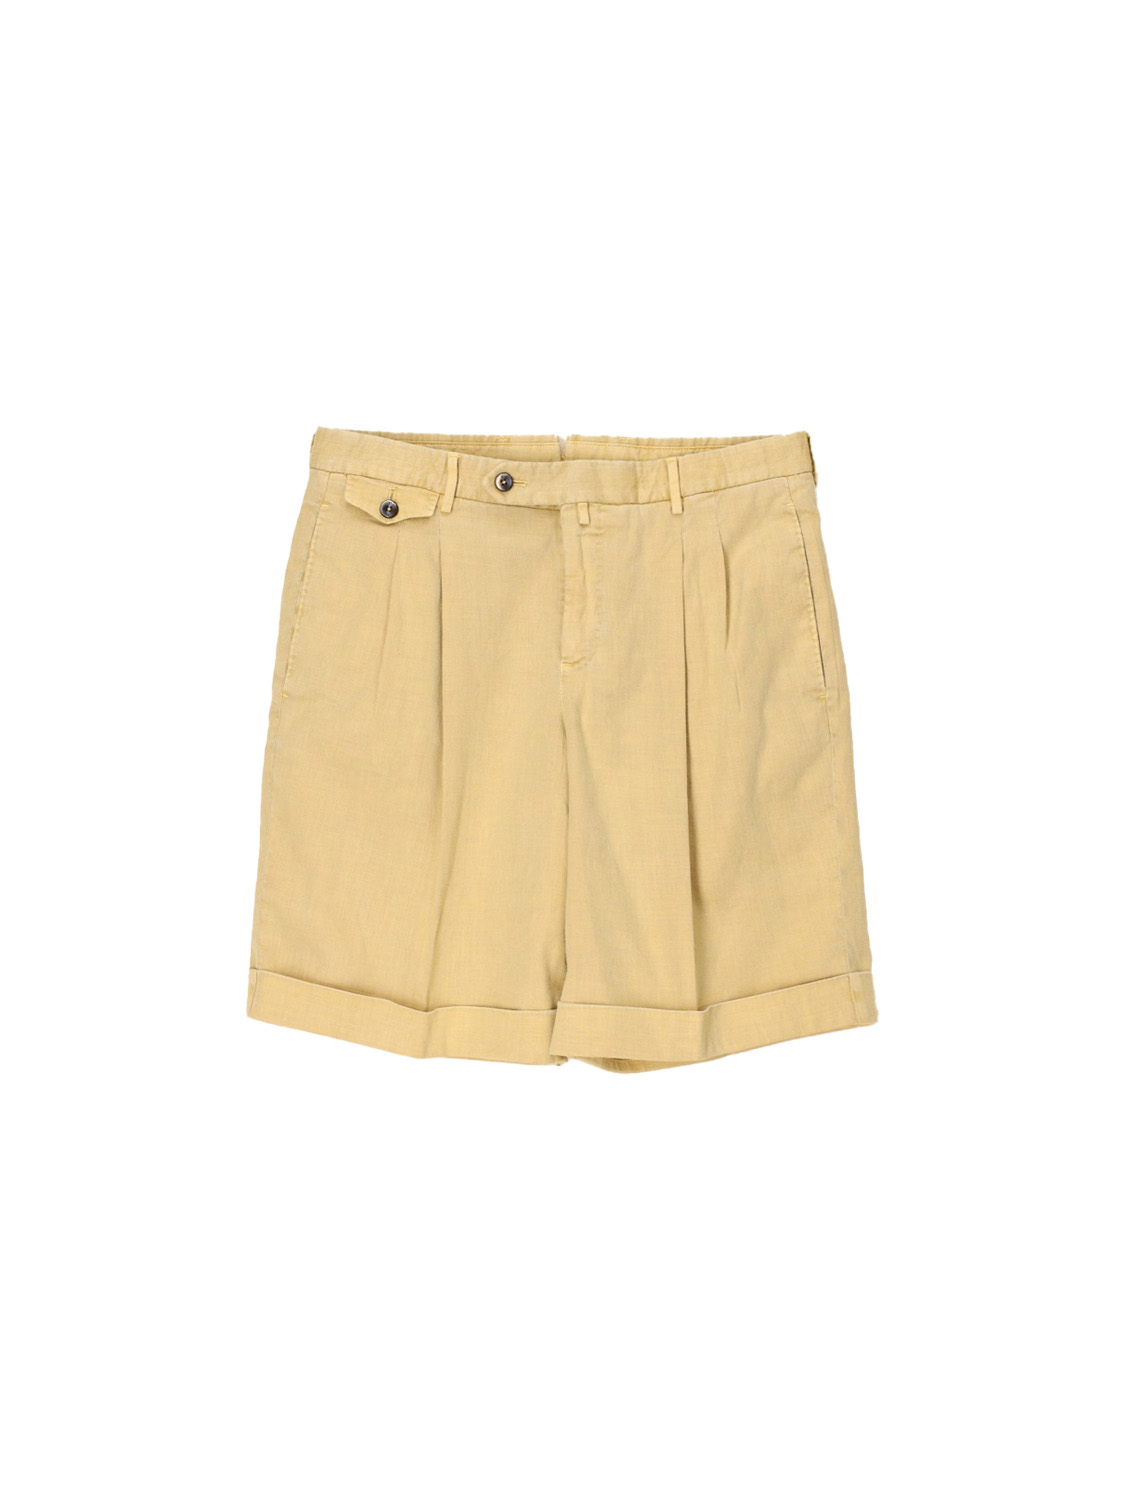 Shorts made from a linen-cotton mix 